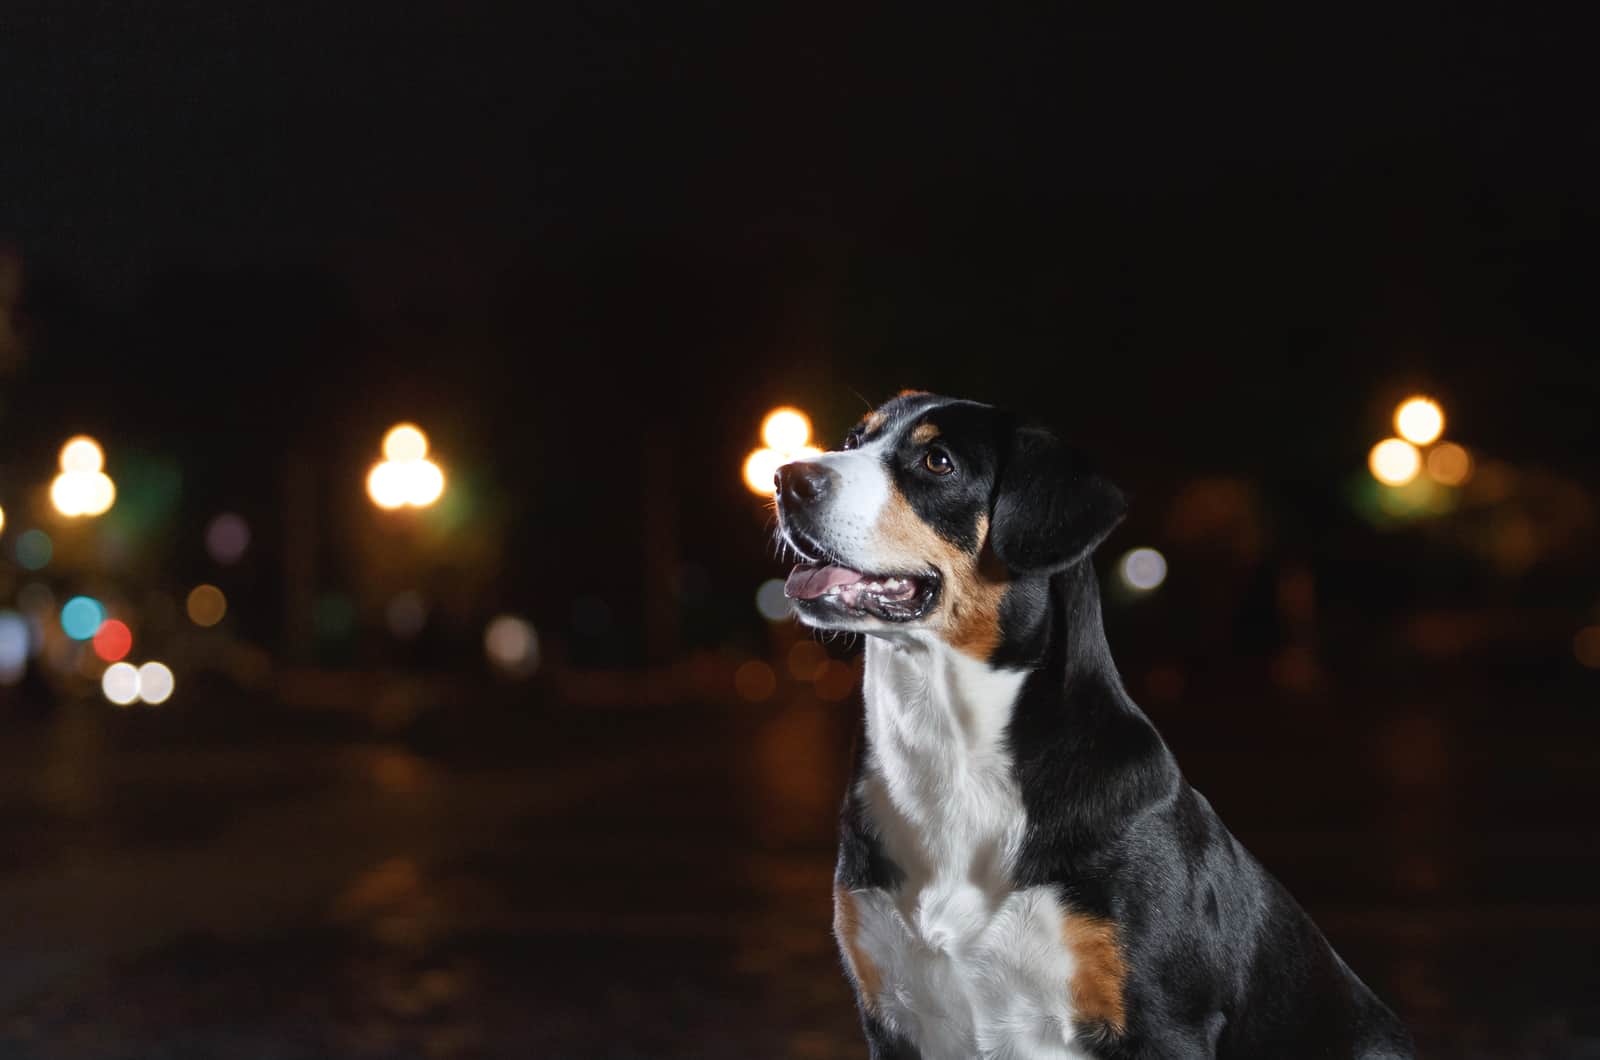 dog outside during night